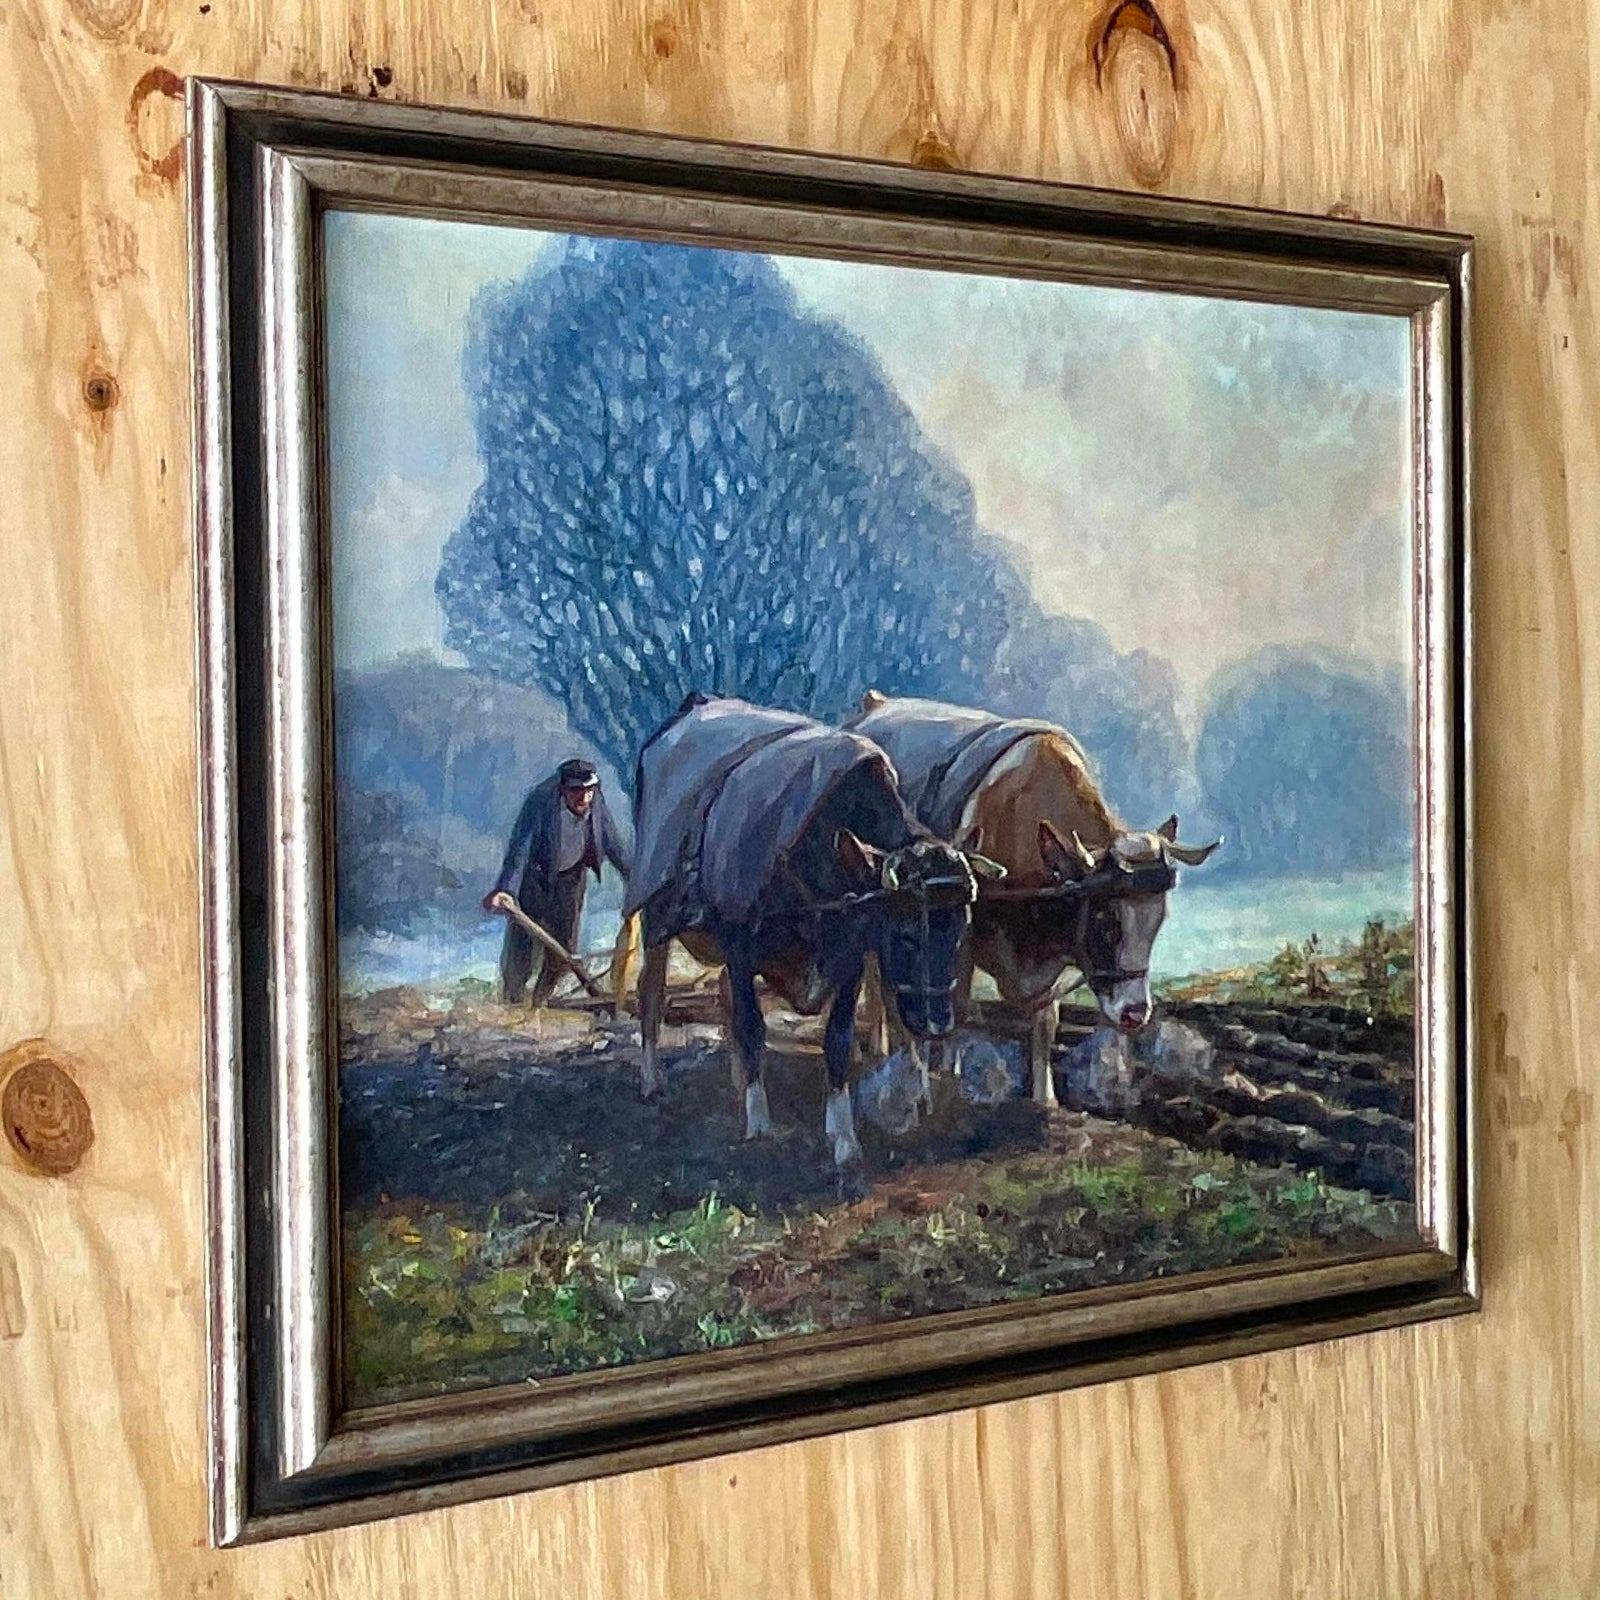 A fabulous vintage Boho original oil painting on canvas. A masterful composition by the artist Eugen Osswald. A quiet piece with two large bulls in a pastoral setting. A brilliant work in pale blues, browns and greens. A highly collectible artist